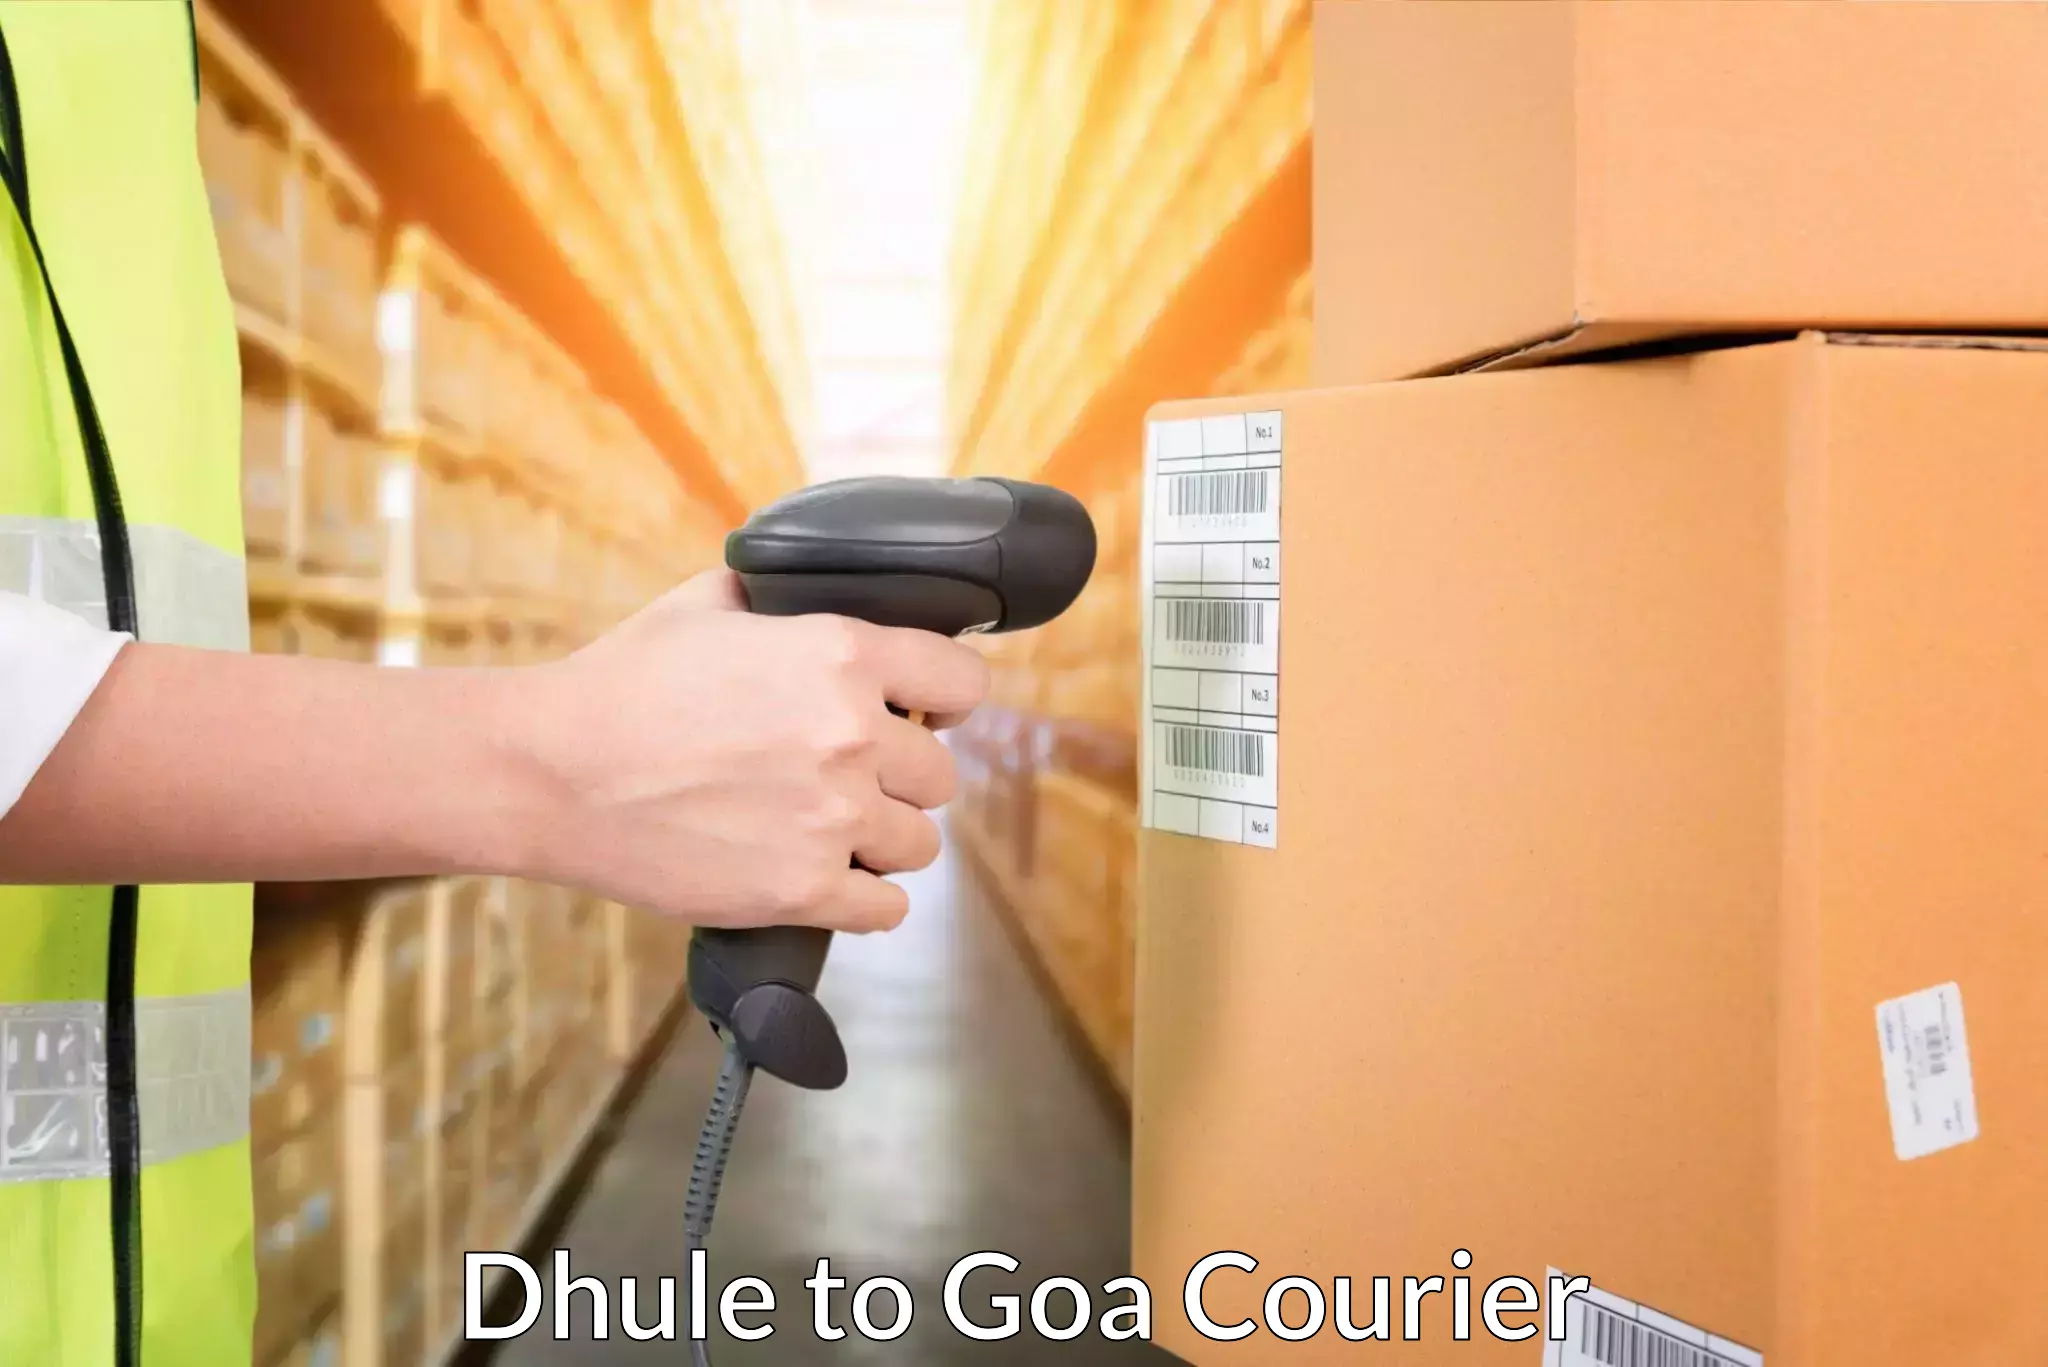 Courier dispatch services Dhule to Vasco da Gama